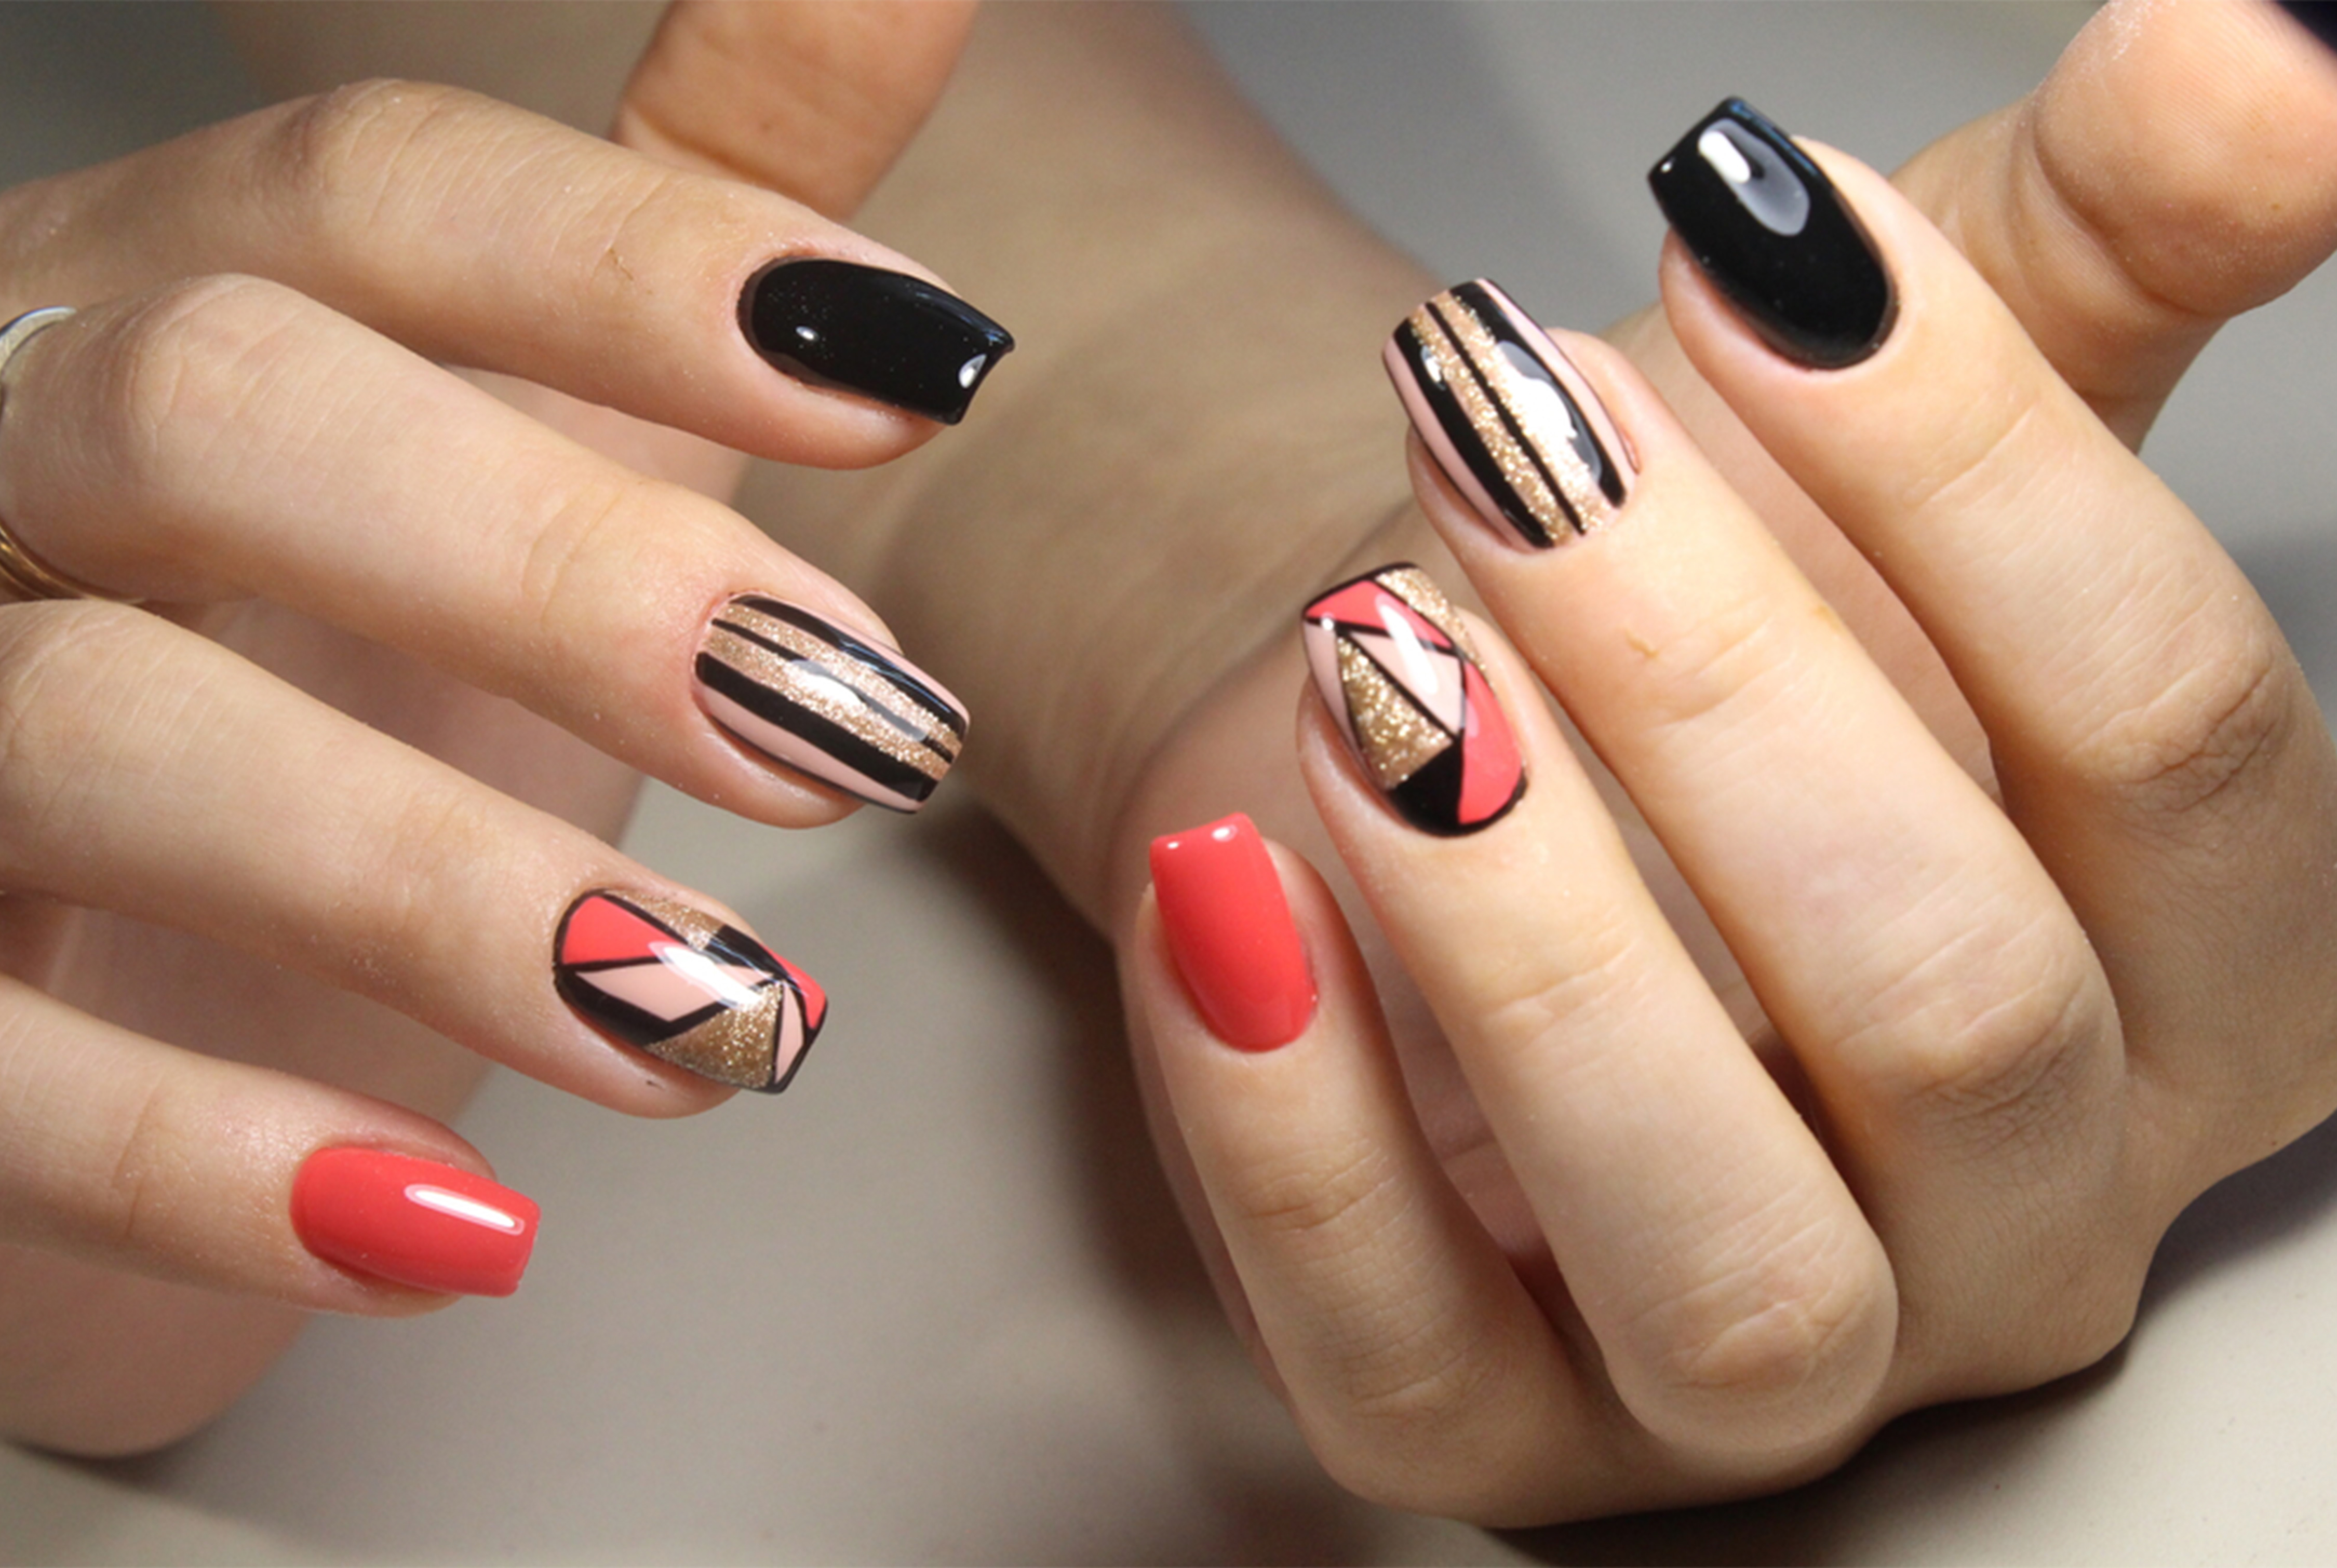 10. "Pudapest-Inspired Nail Art Instagram Accounts to Follow" - wide 1